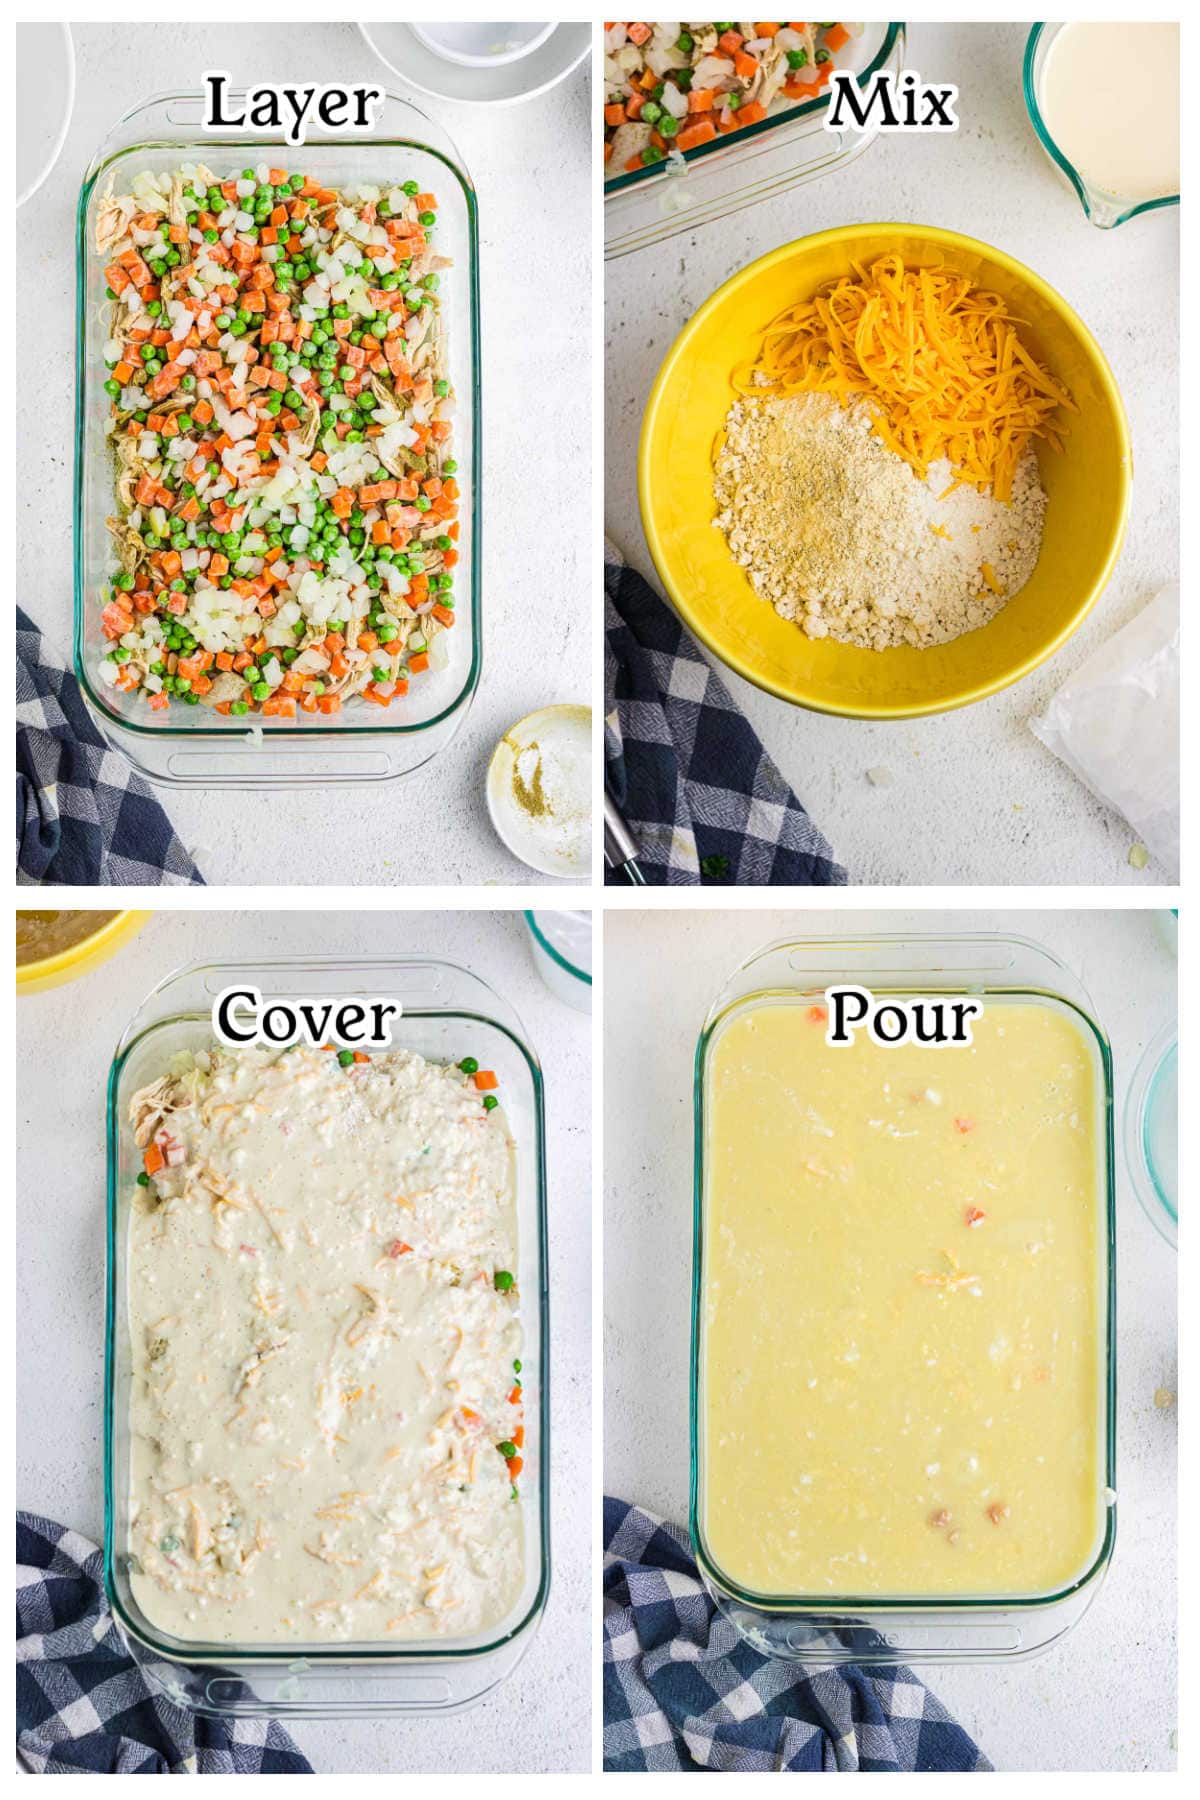 Four images in a grid with text overlay depicting the main recipe steps.